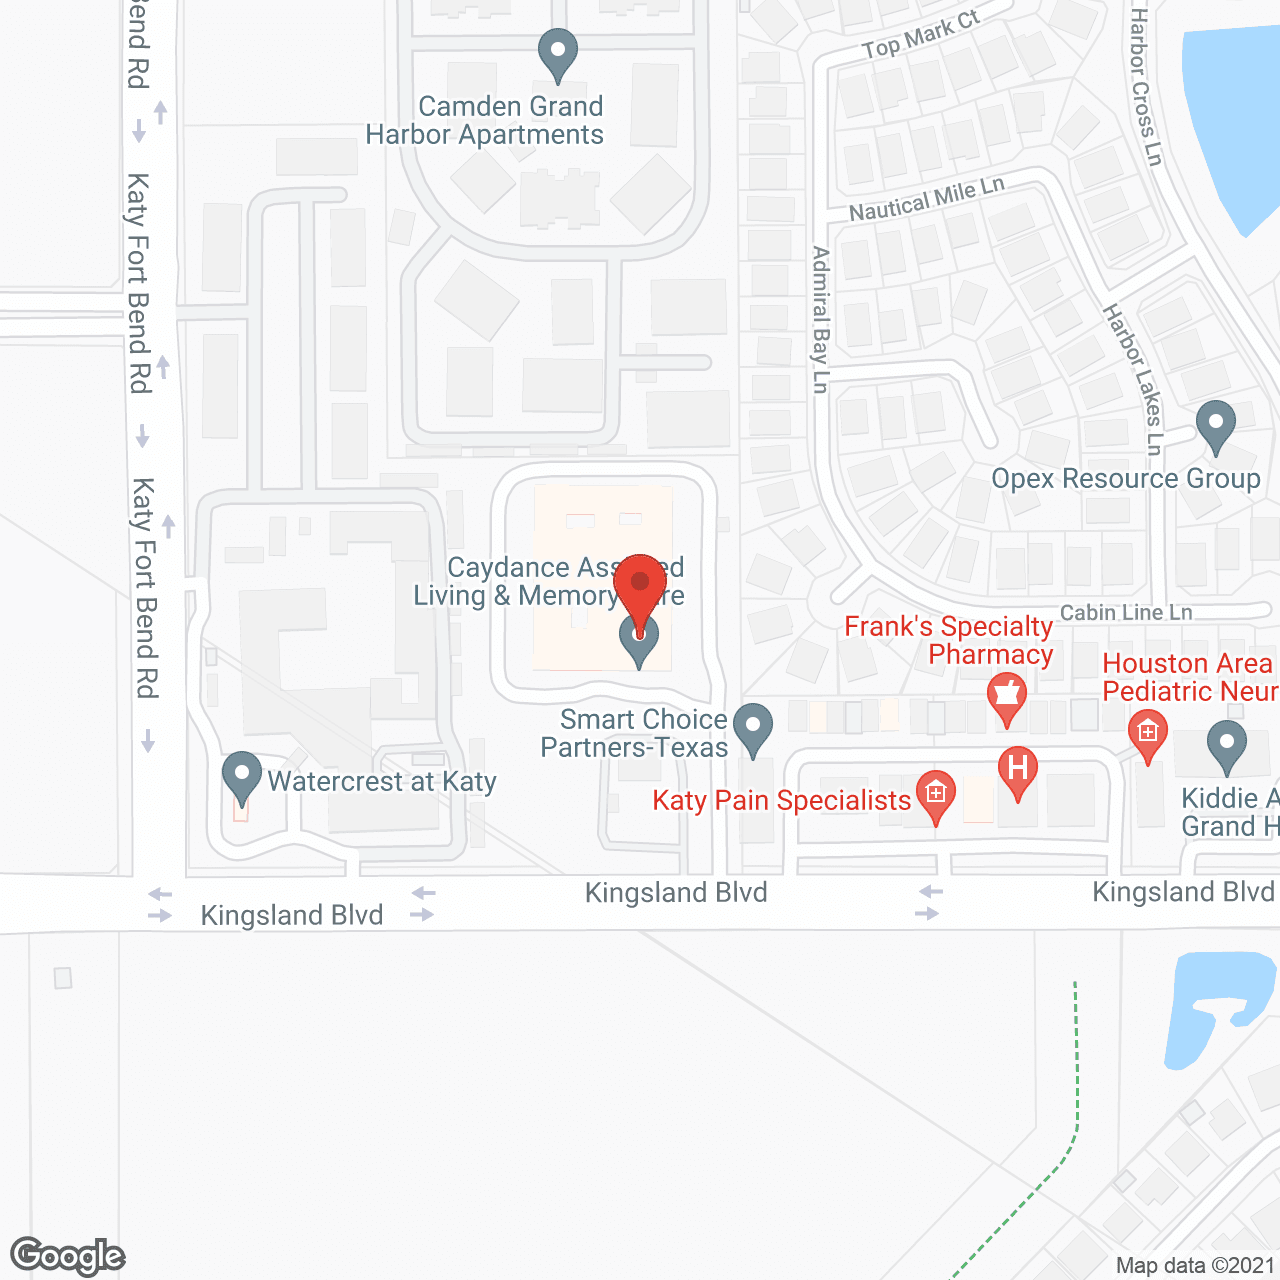 Caydance Assisted Living and Memory Care in google map